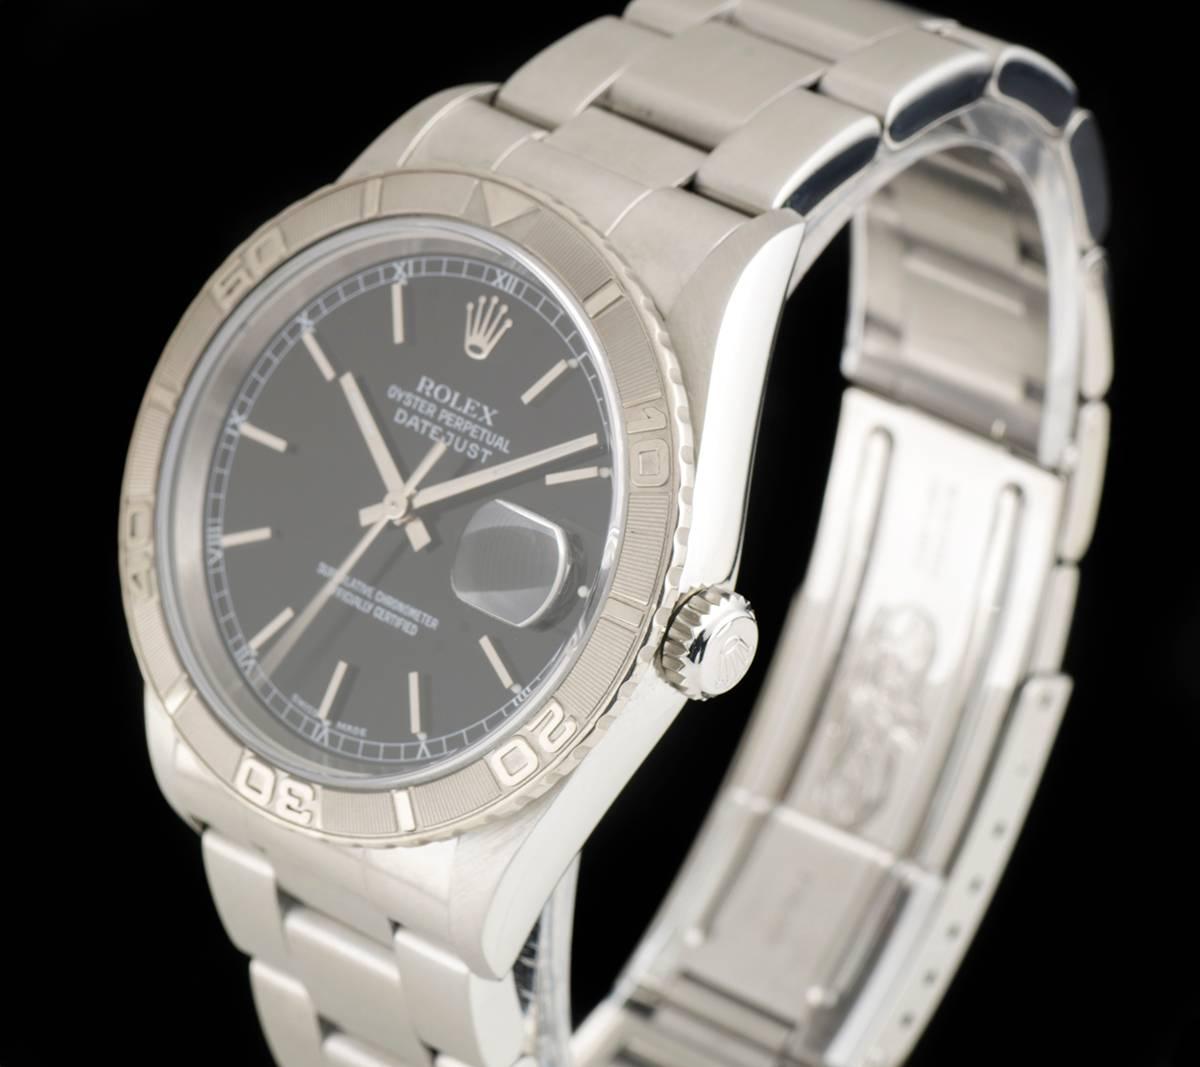 A Stainless Steel Oyster Perpetual Turn-O-Graph Datejust Gents Wristwatch, black dial with applied hour markers, date at 3 0'clock, a stainless steel bi-directional rotating engine turned bezel, a stainless steel oyster bracelet with a stainless